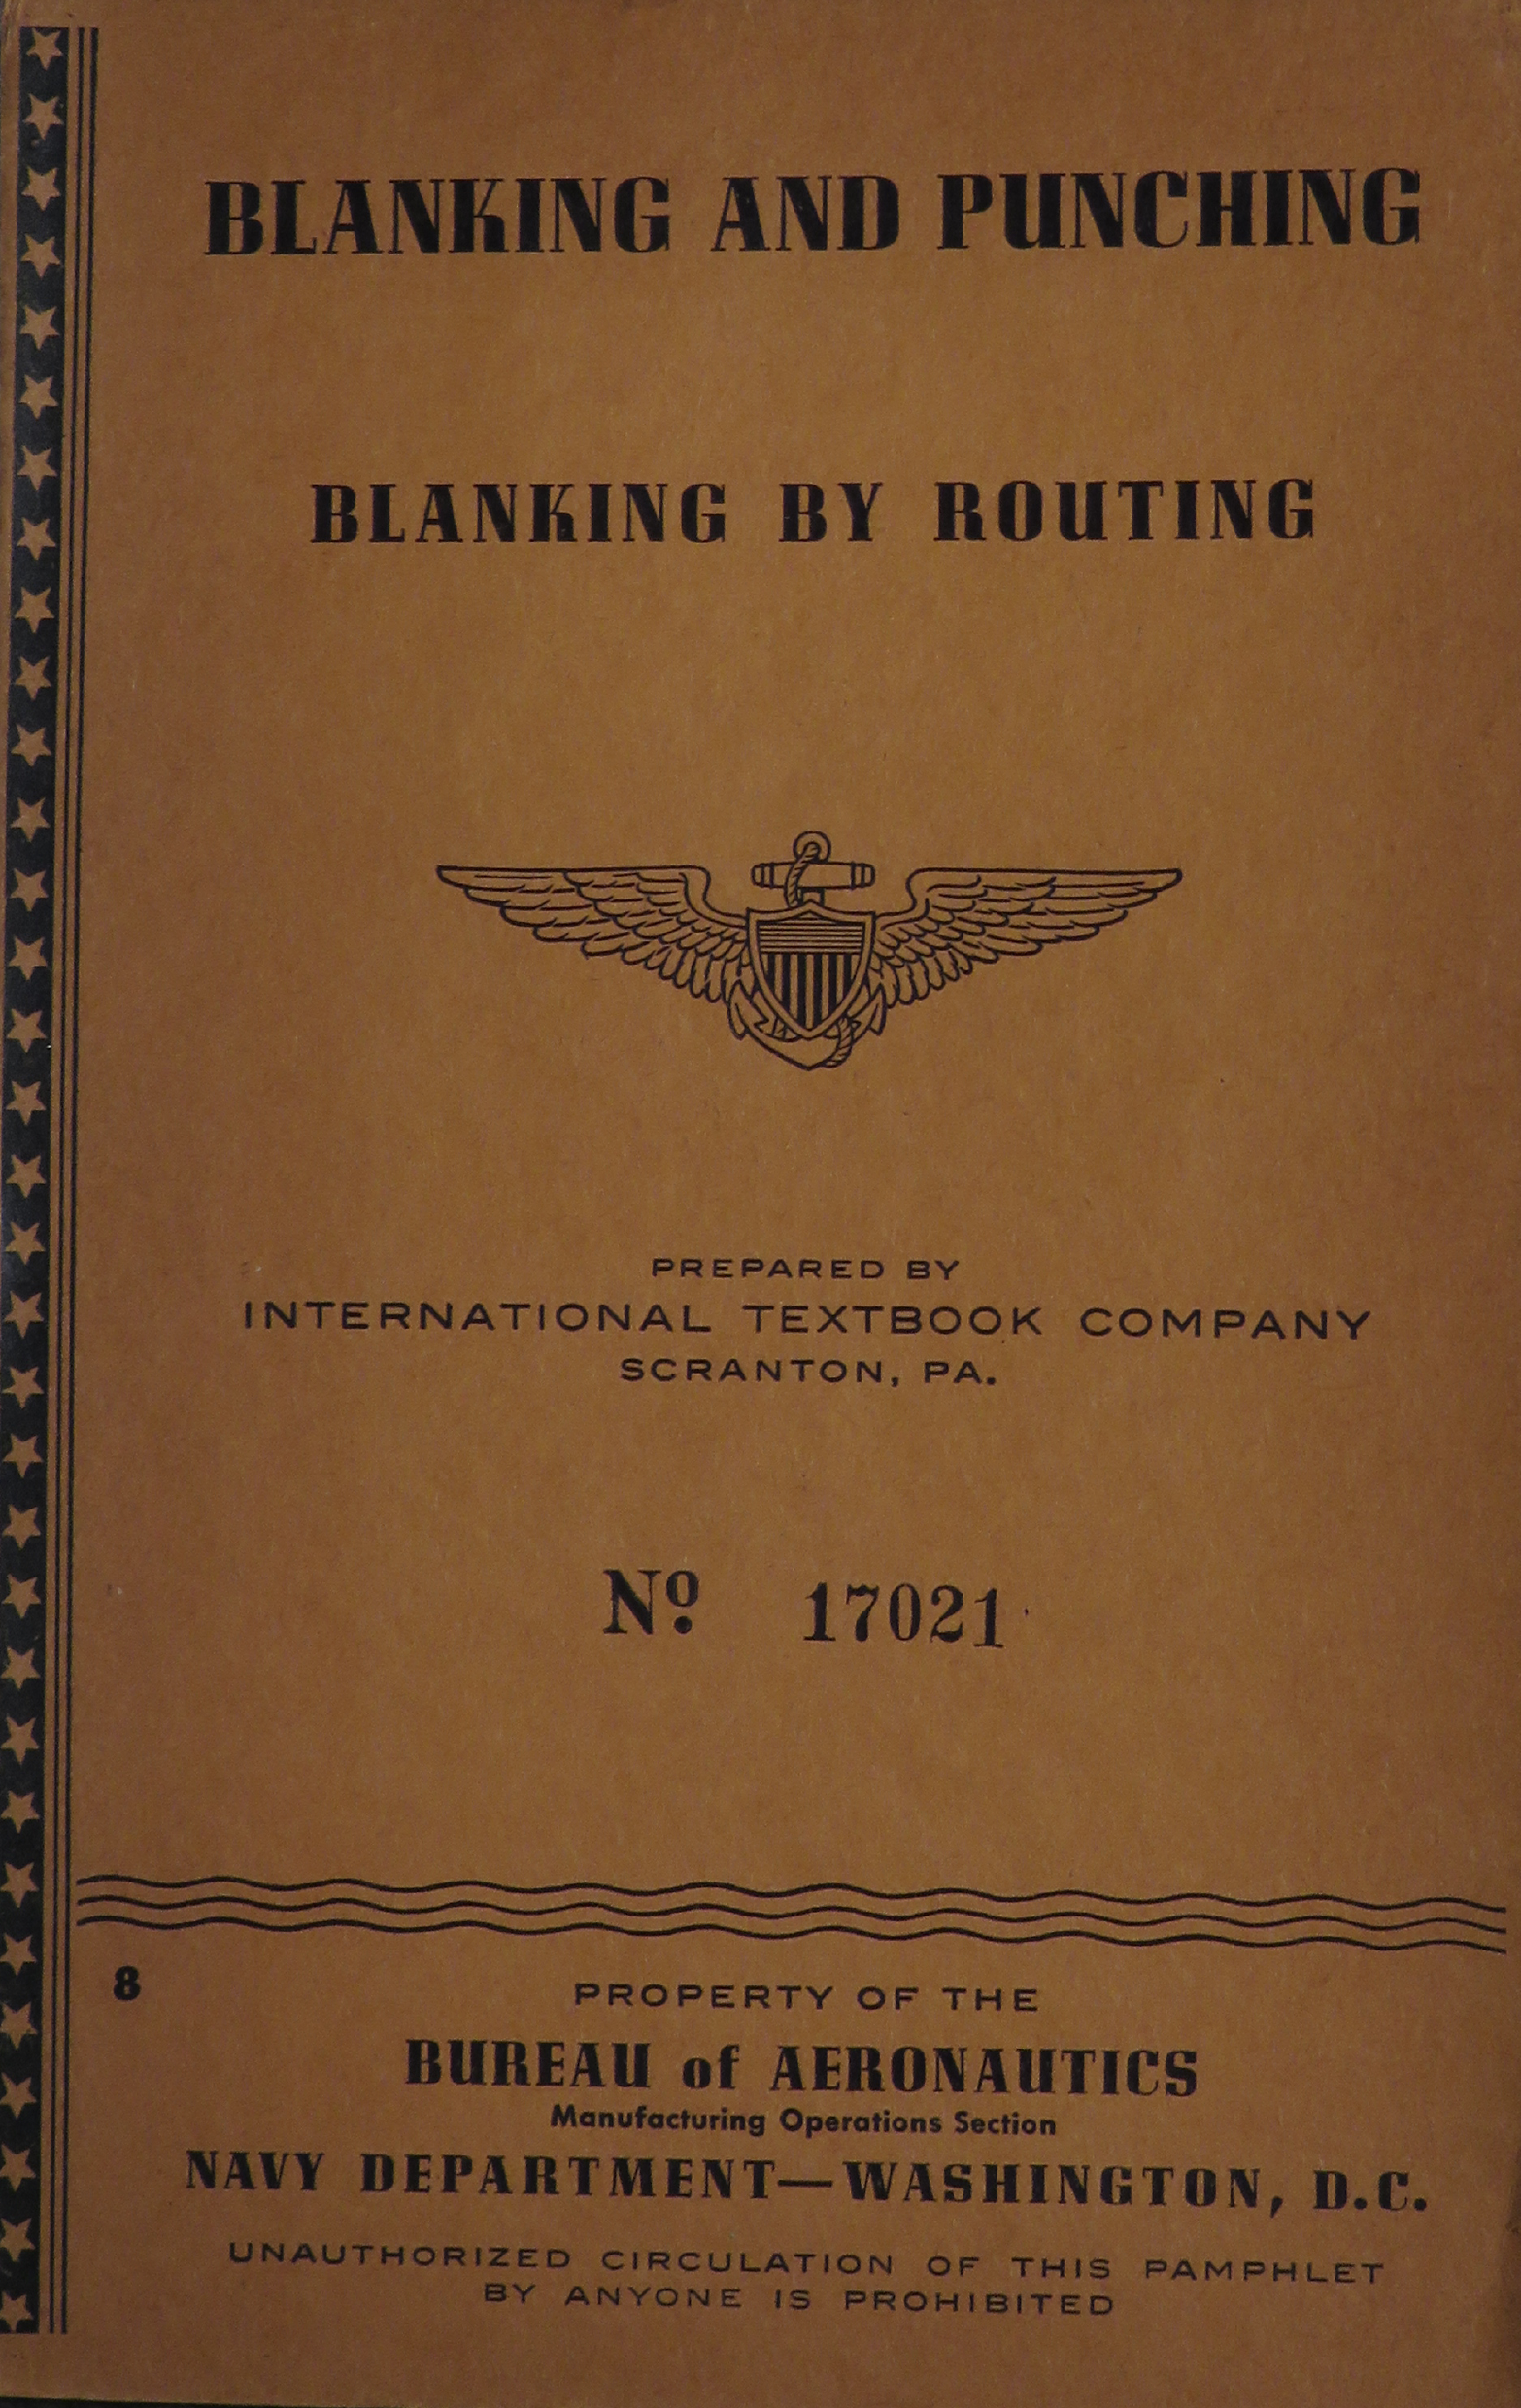 Sample page 1 from AirCorps Library document: Blanking and Punching - Blanking by Routing - Bureau of Aeronautics